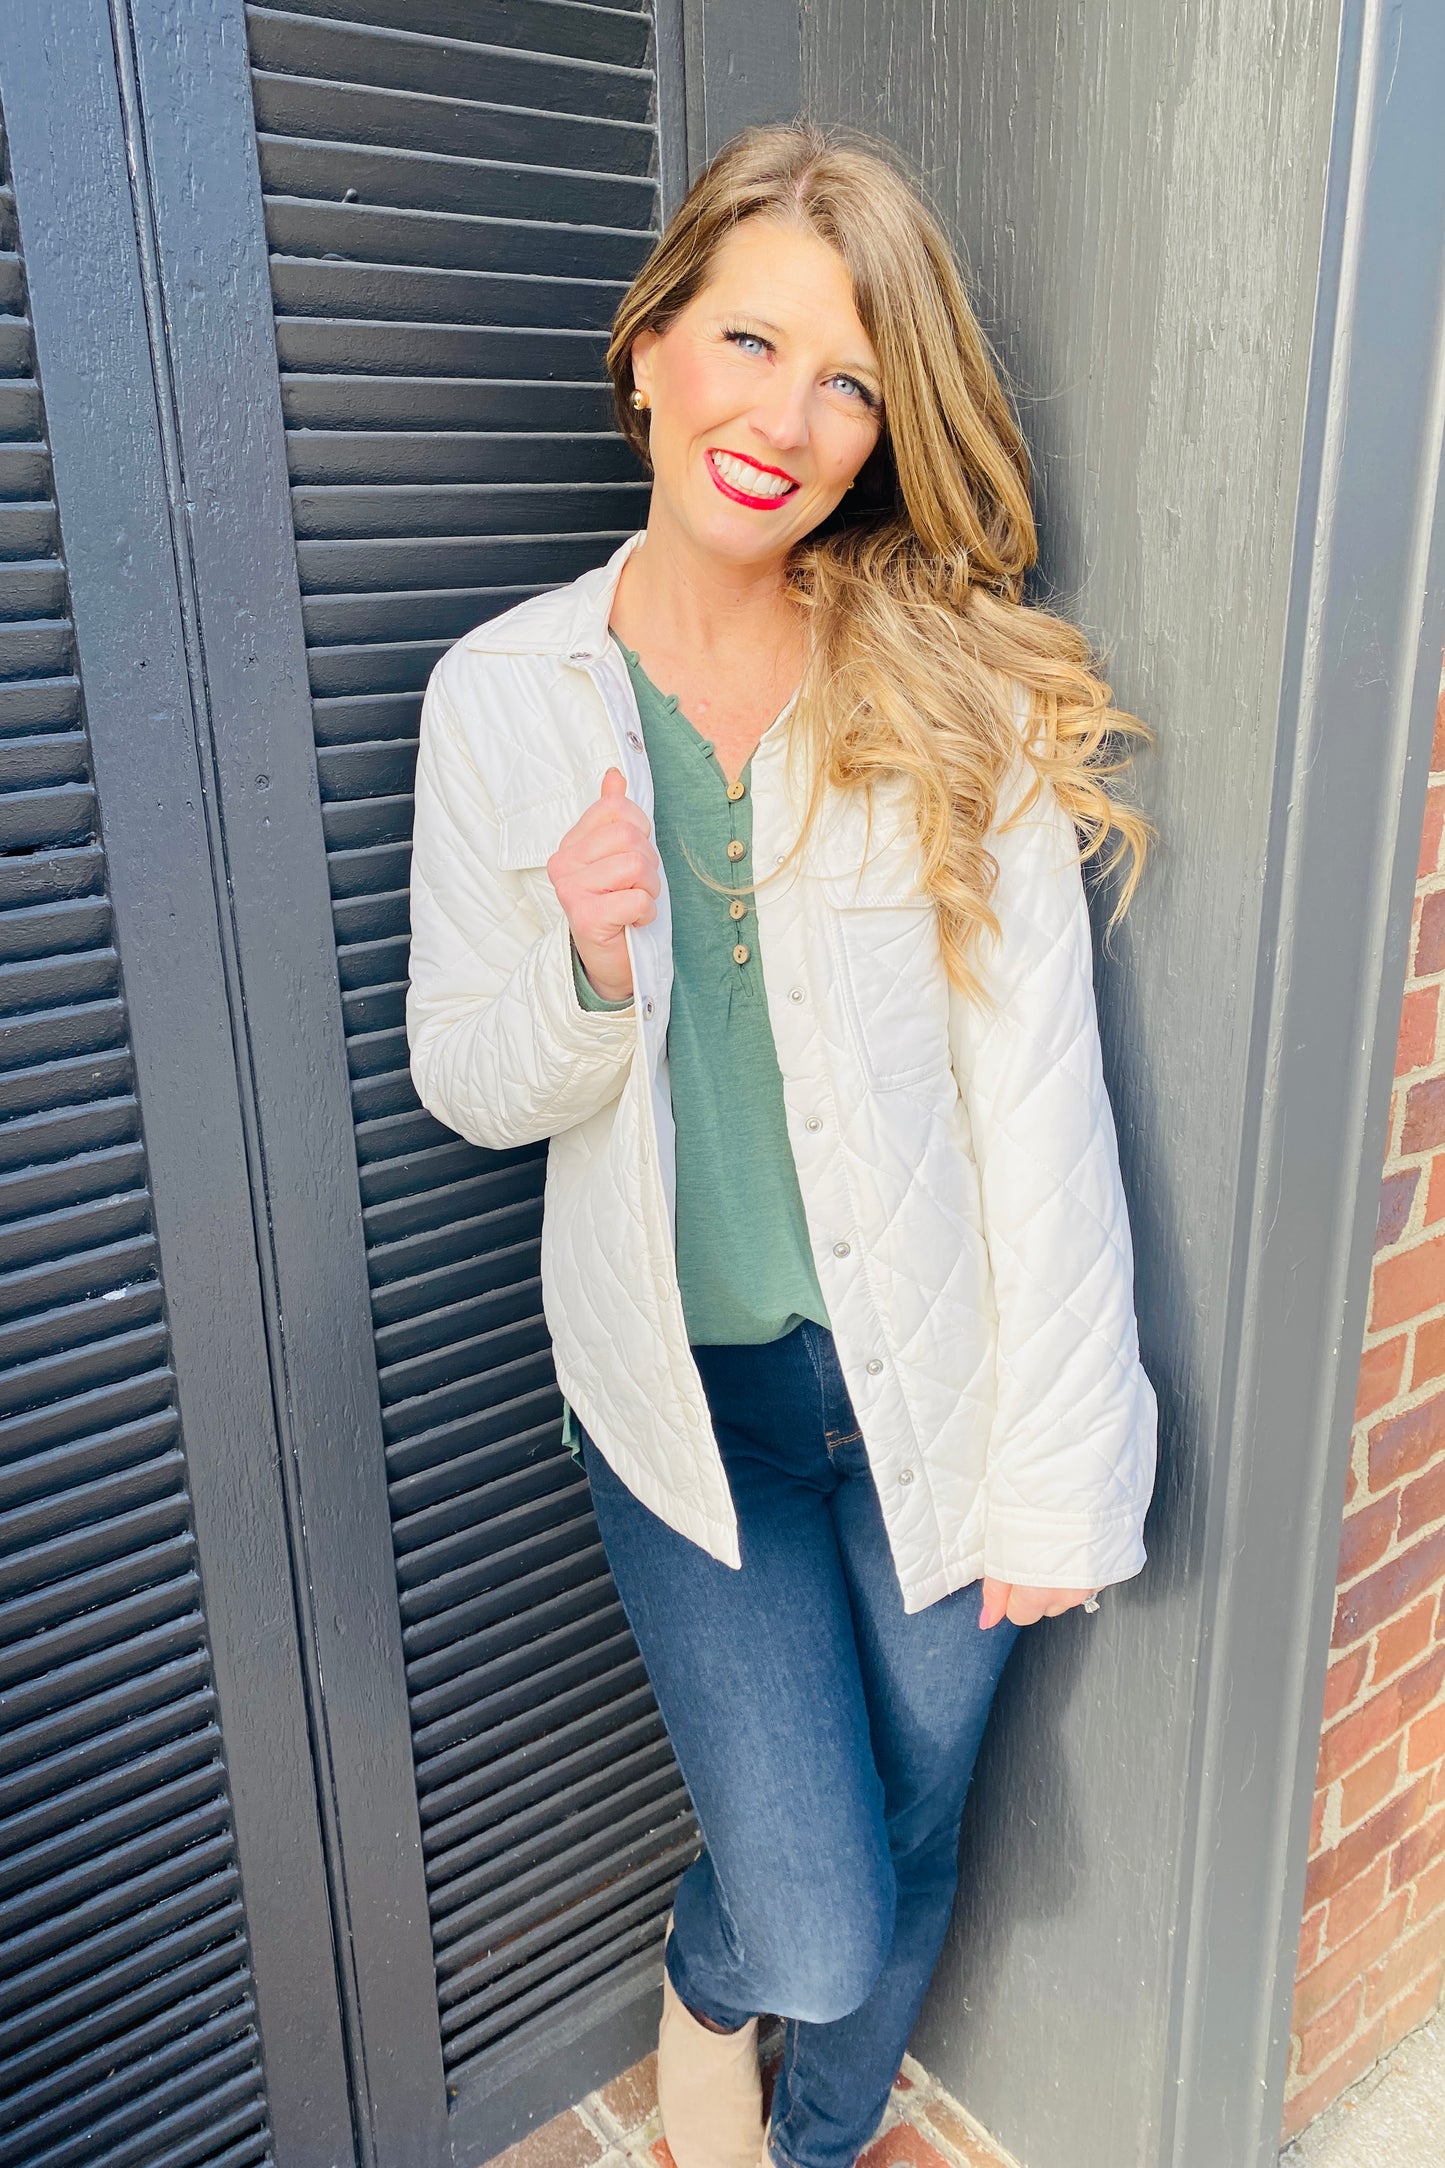 Ivory Quilted Jacket Tops available at Southern Sunday